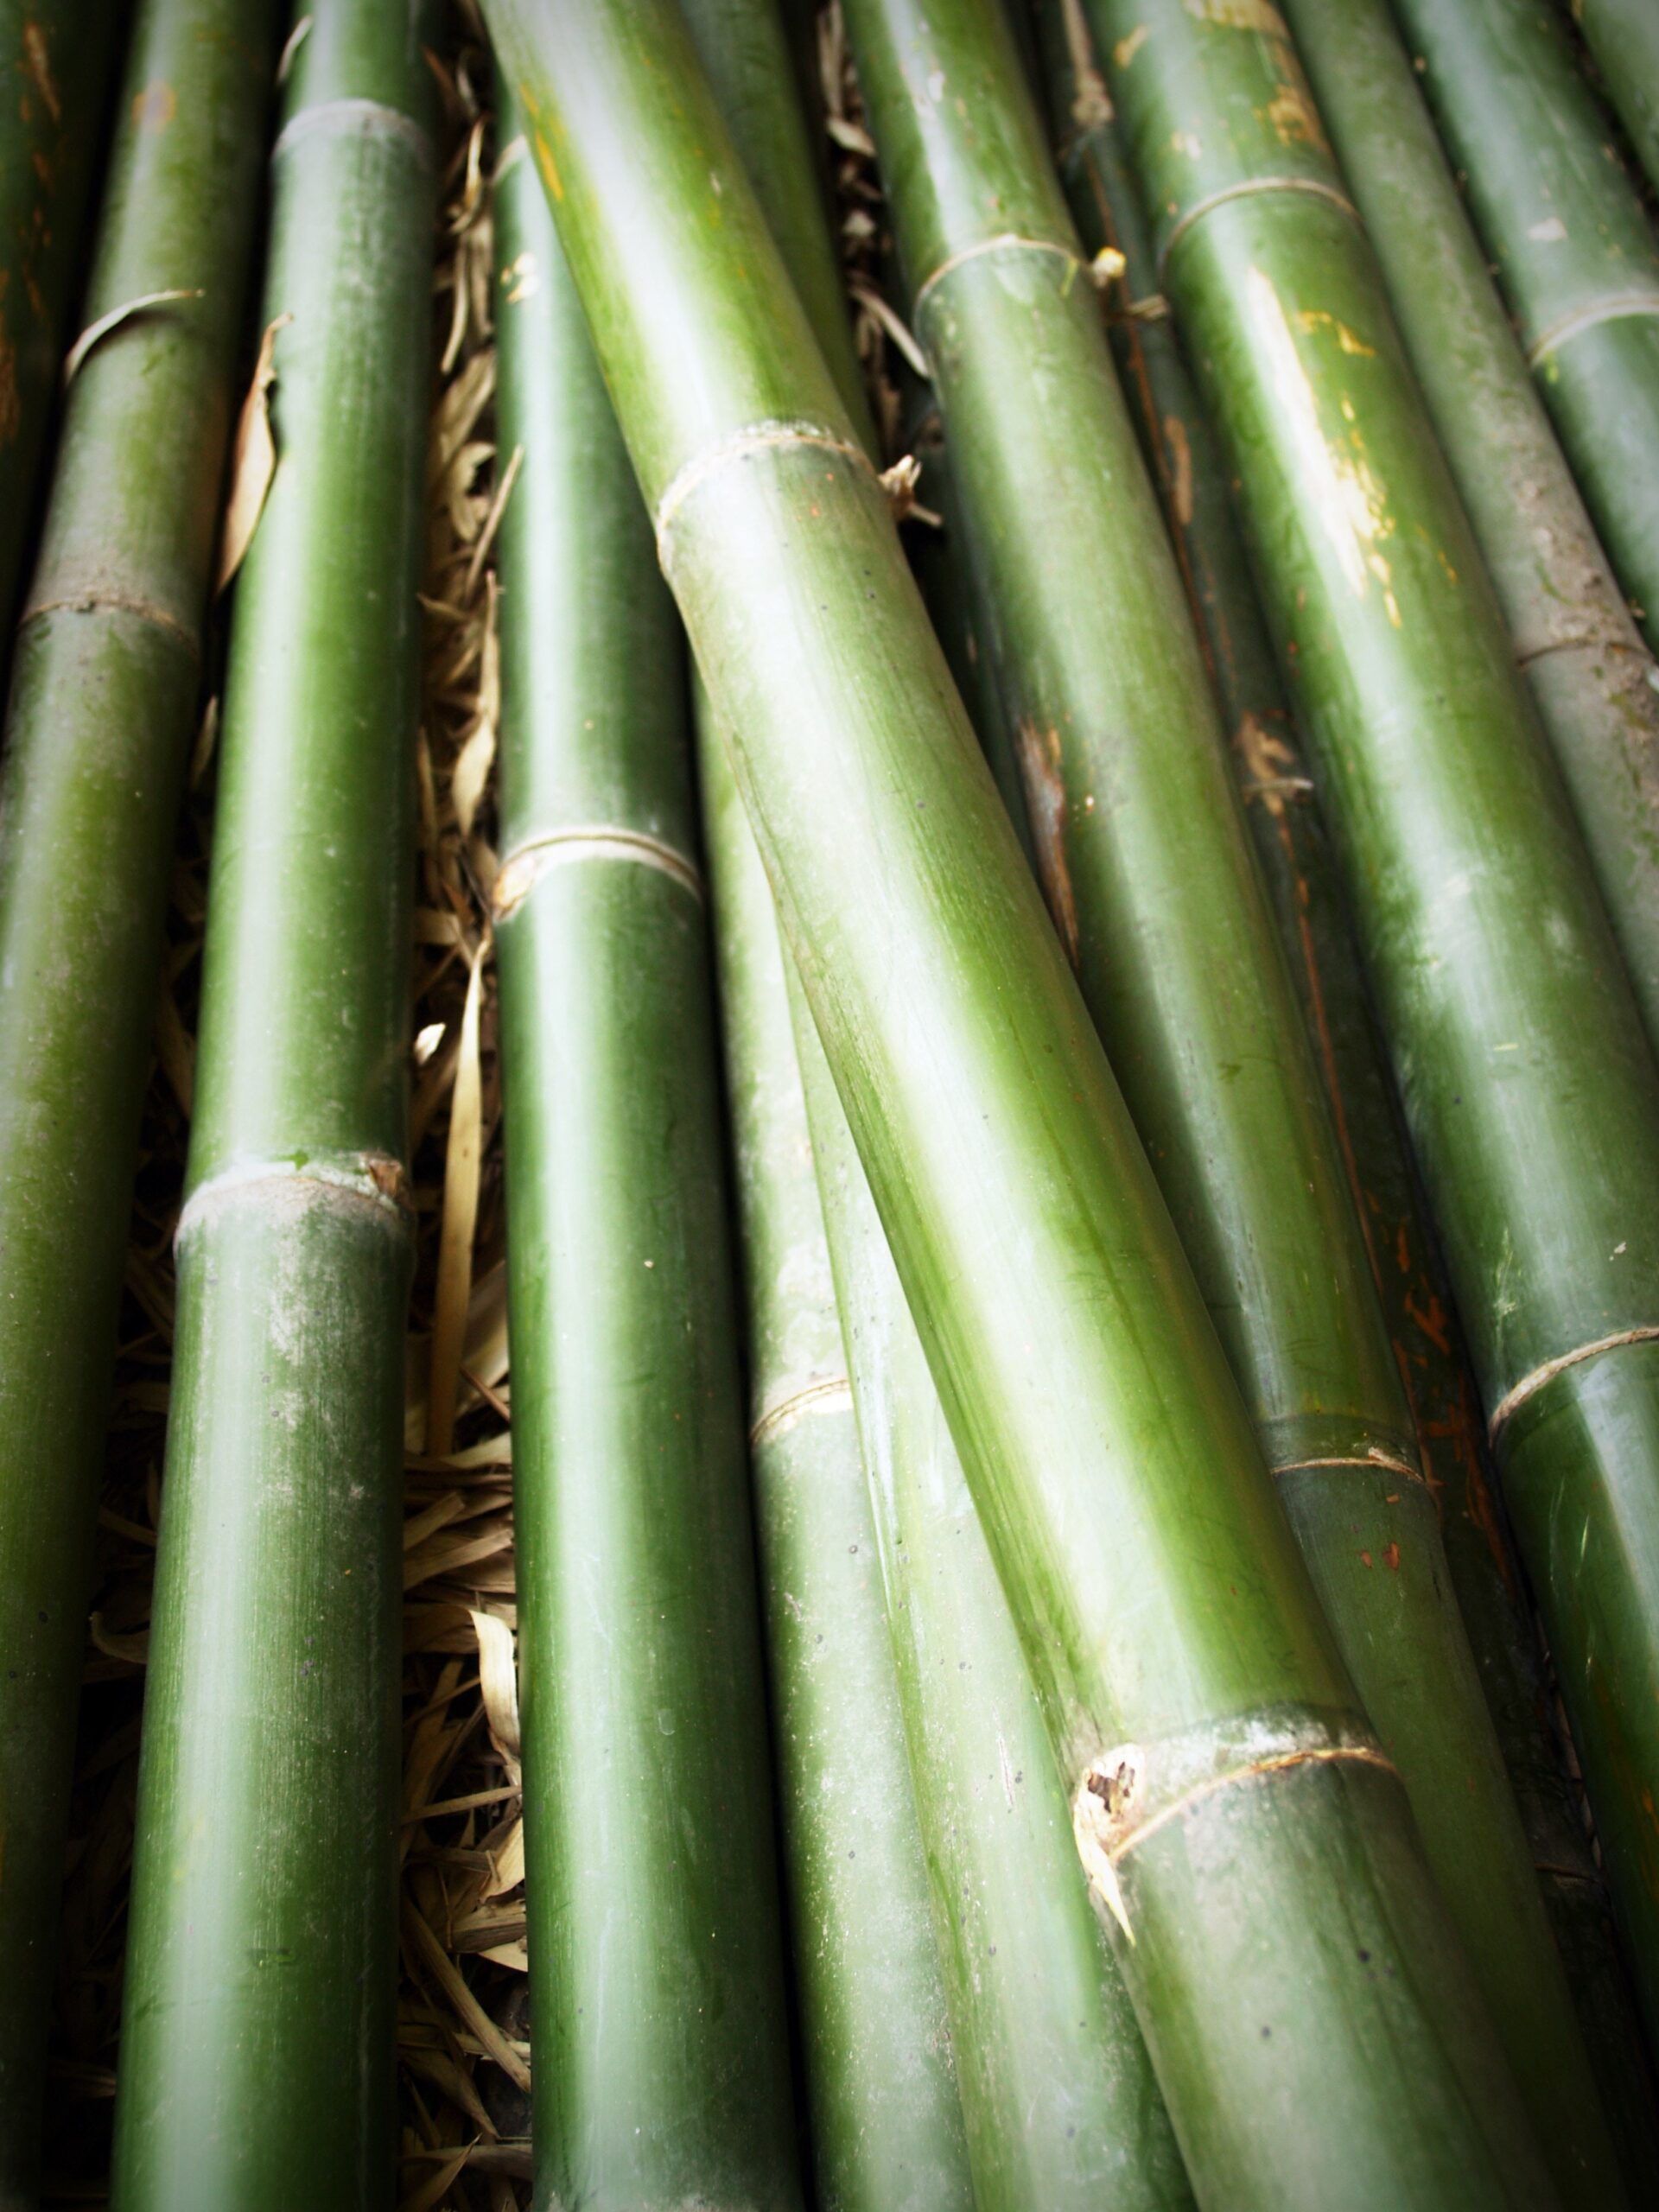 close up of fresh green bamboo canes Photo by icon0.com from Pexels